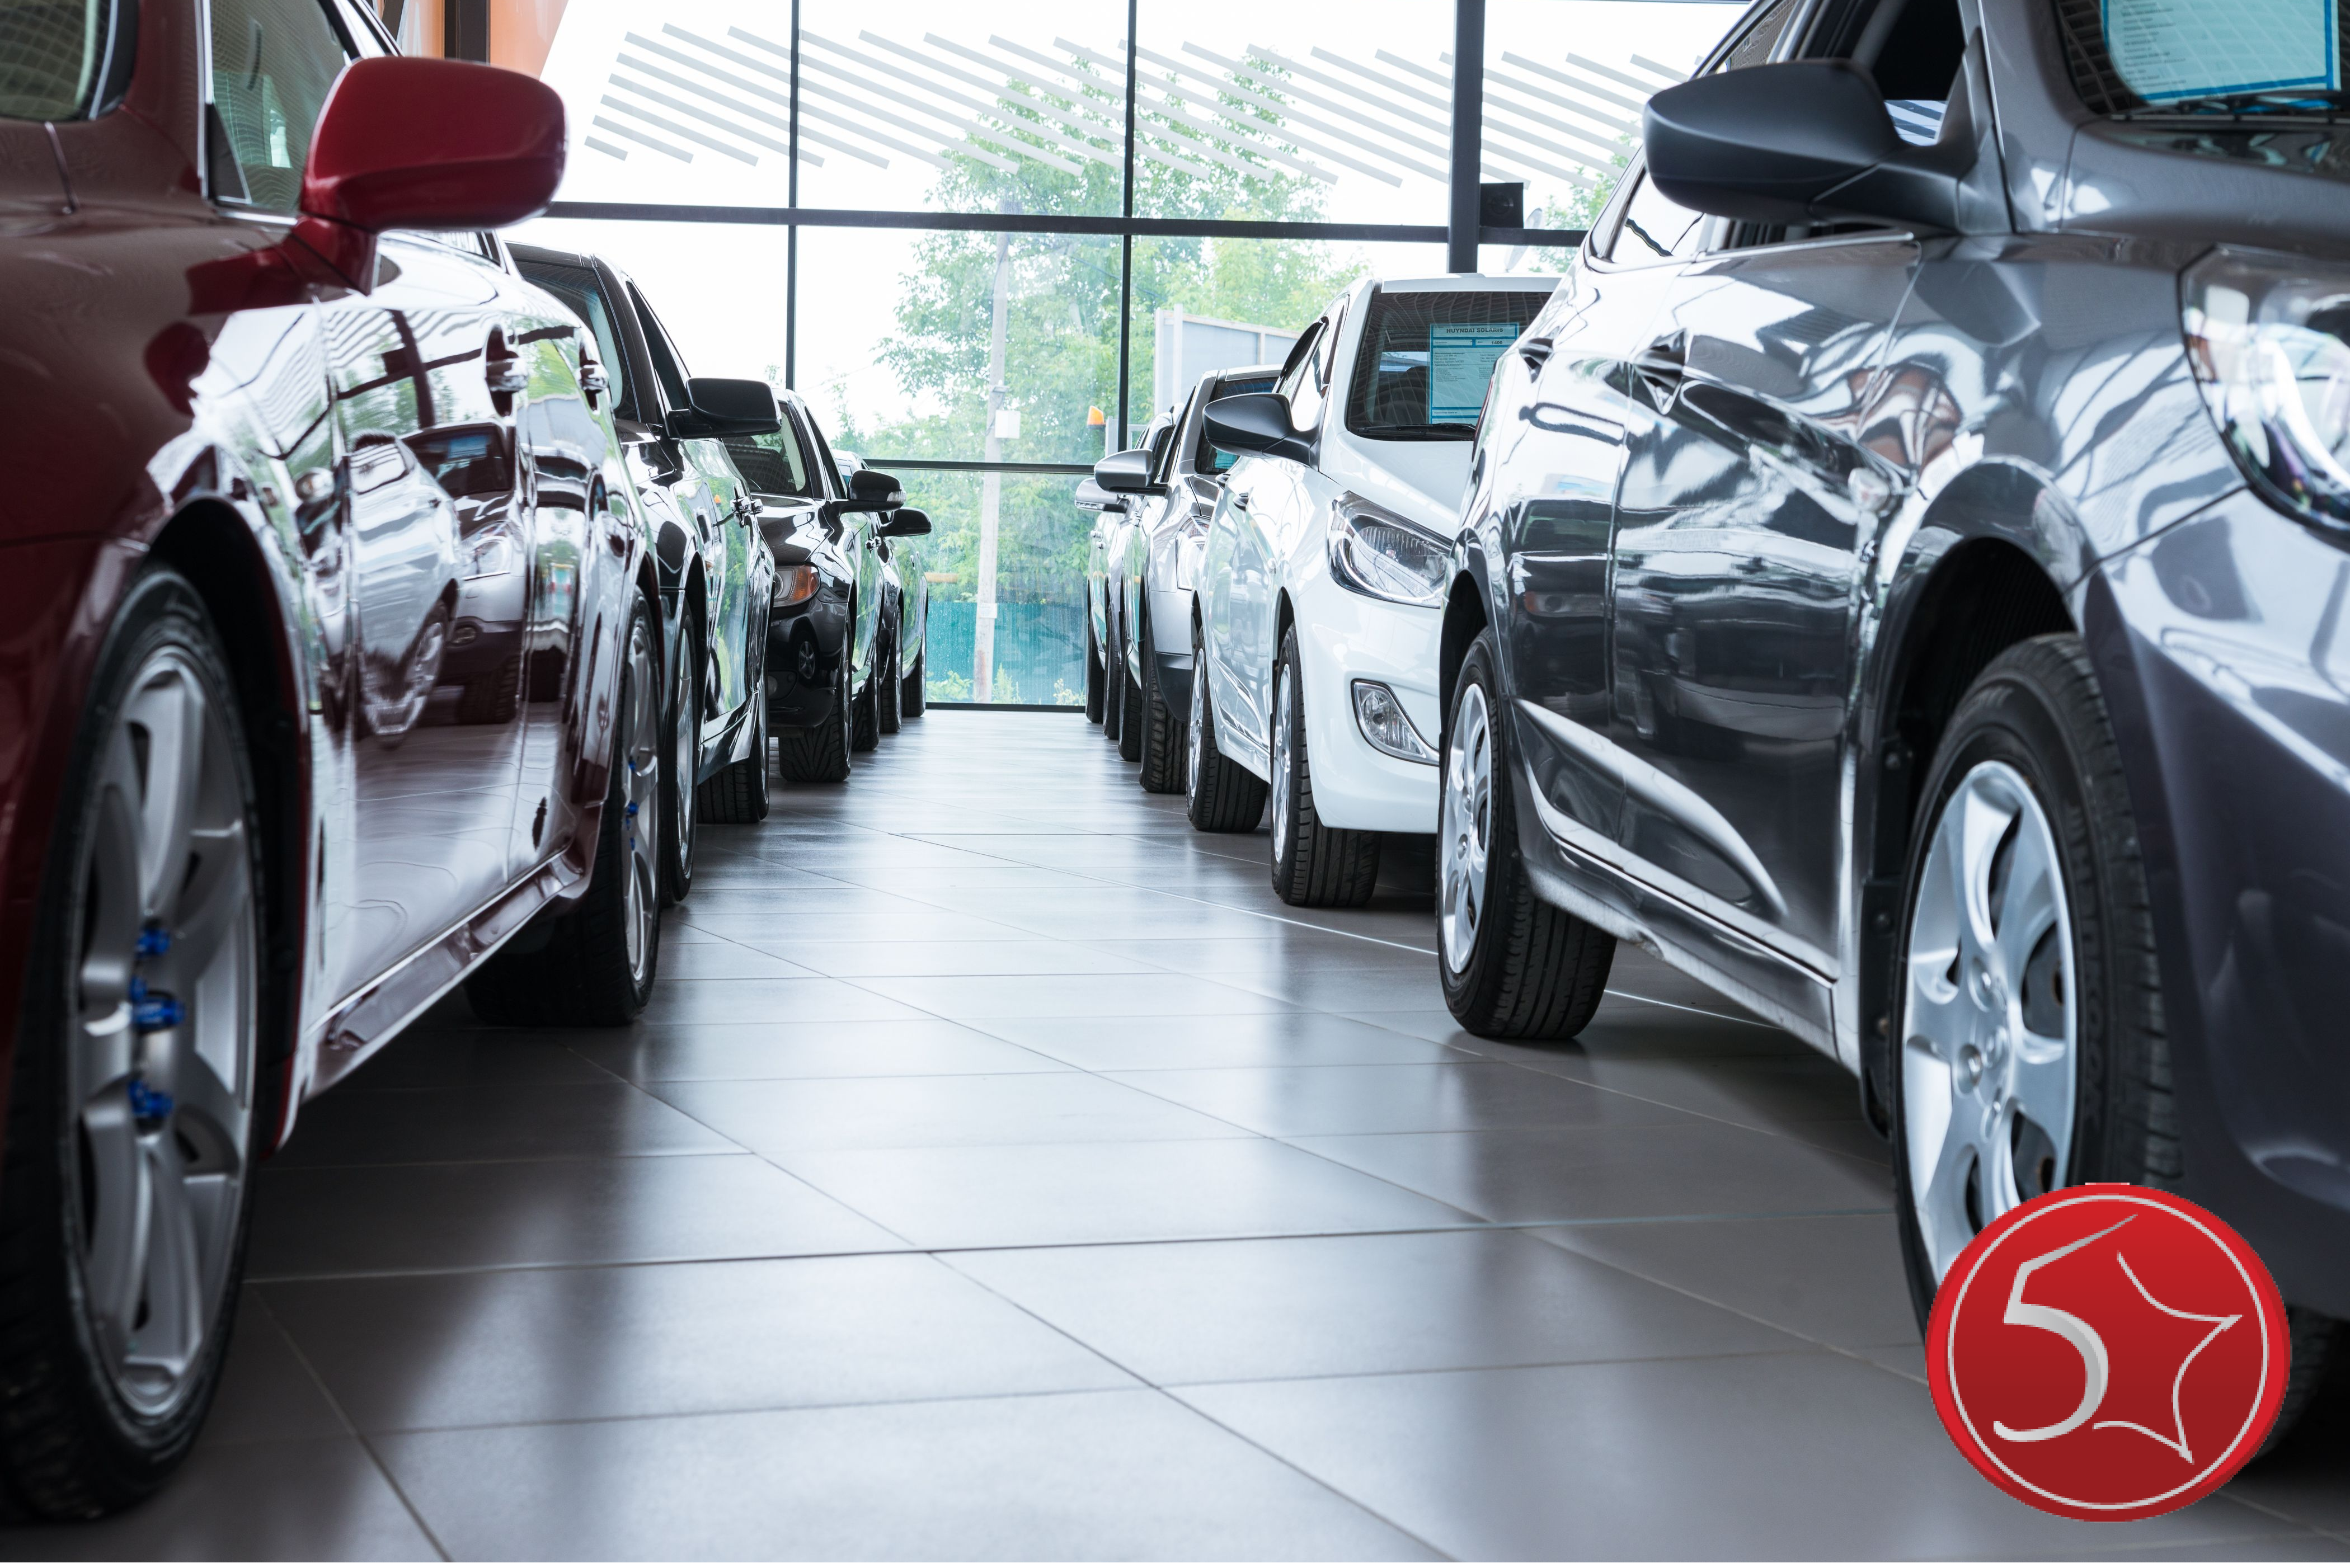 Why 5 Star Auto Plaza Is a Wise Choice for an Auto Dealer in St. Peters